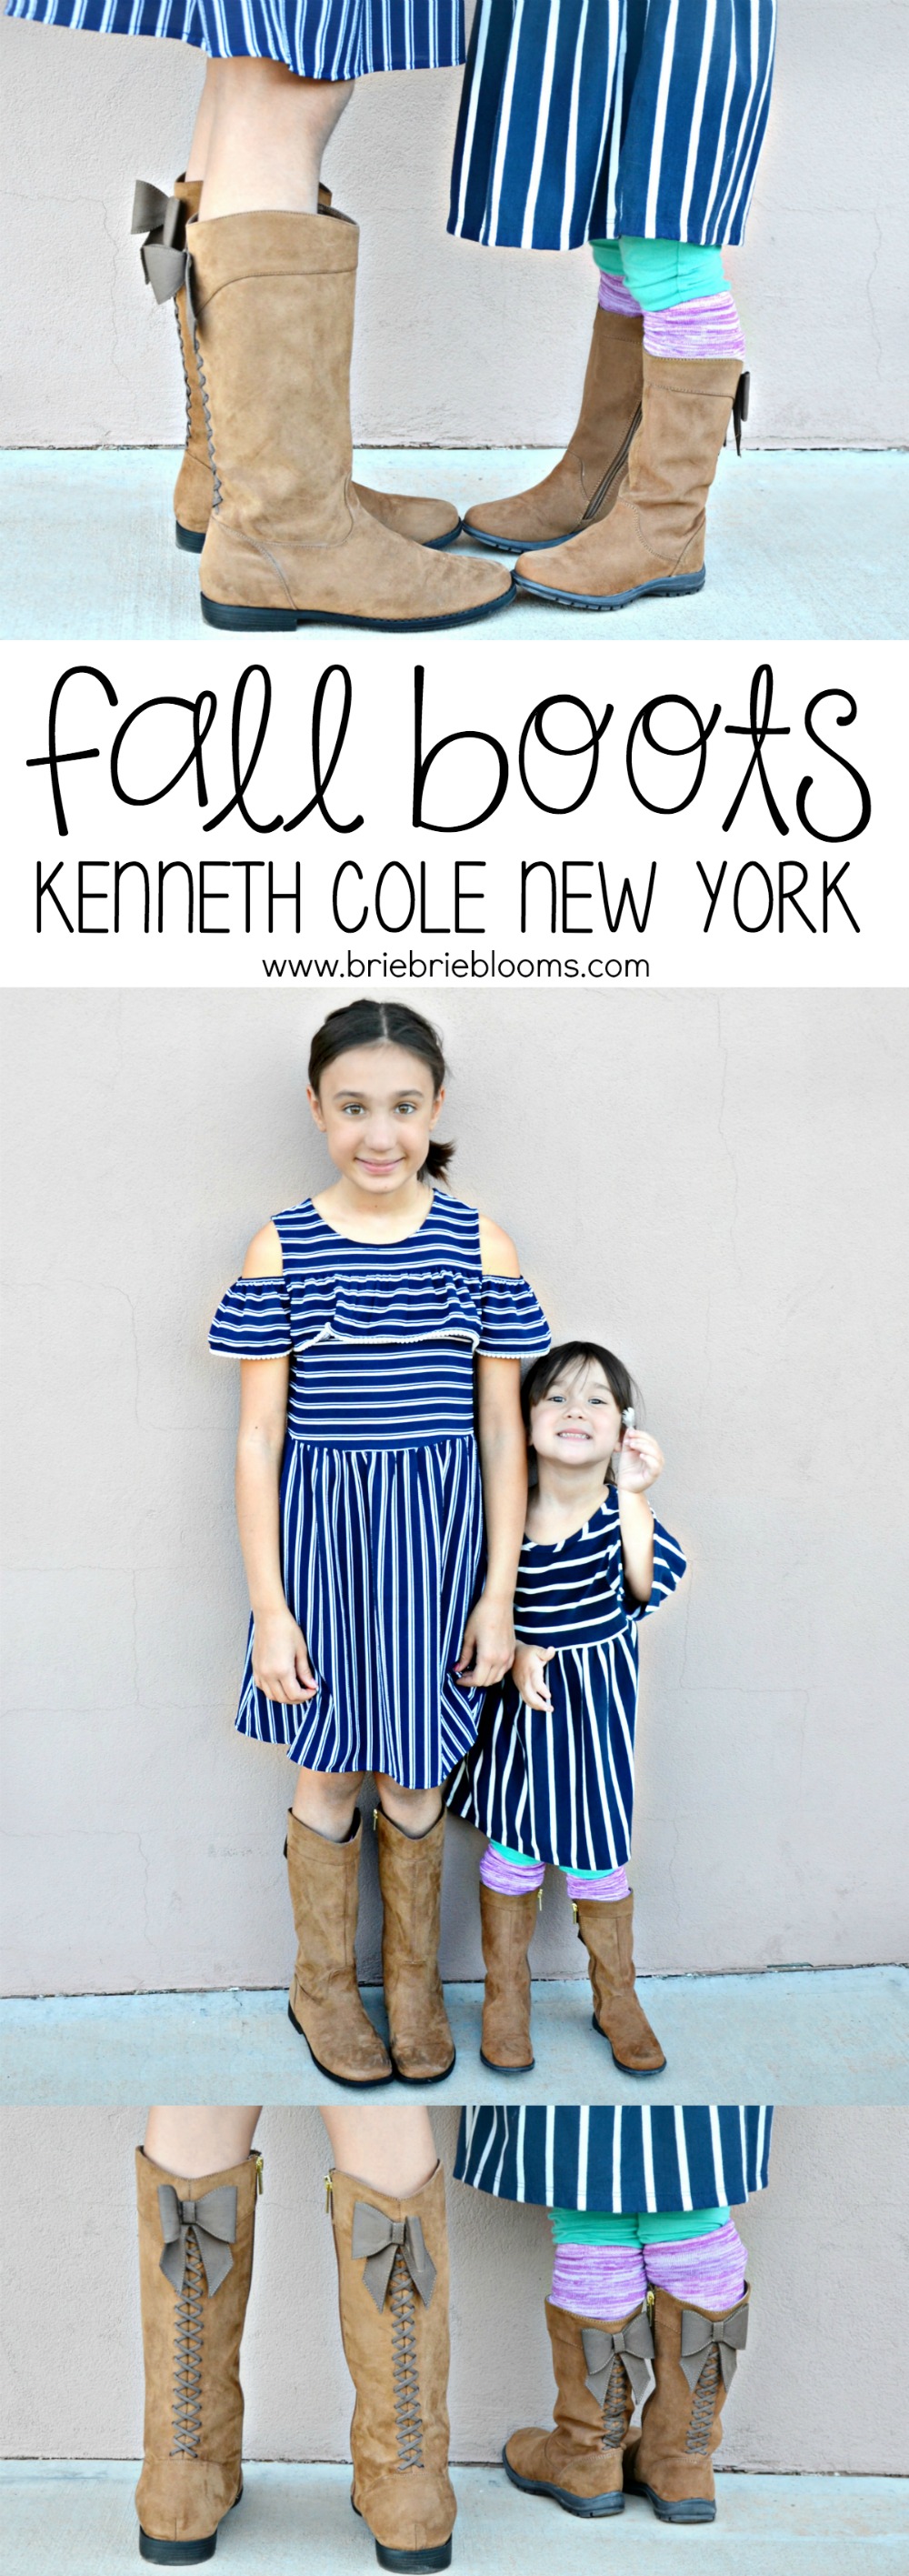 Find favorite fall boots like these from Kenneth Cole New York at kidsshoes.com.